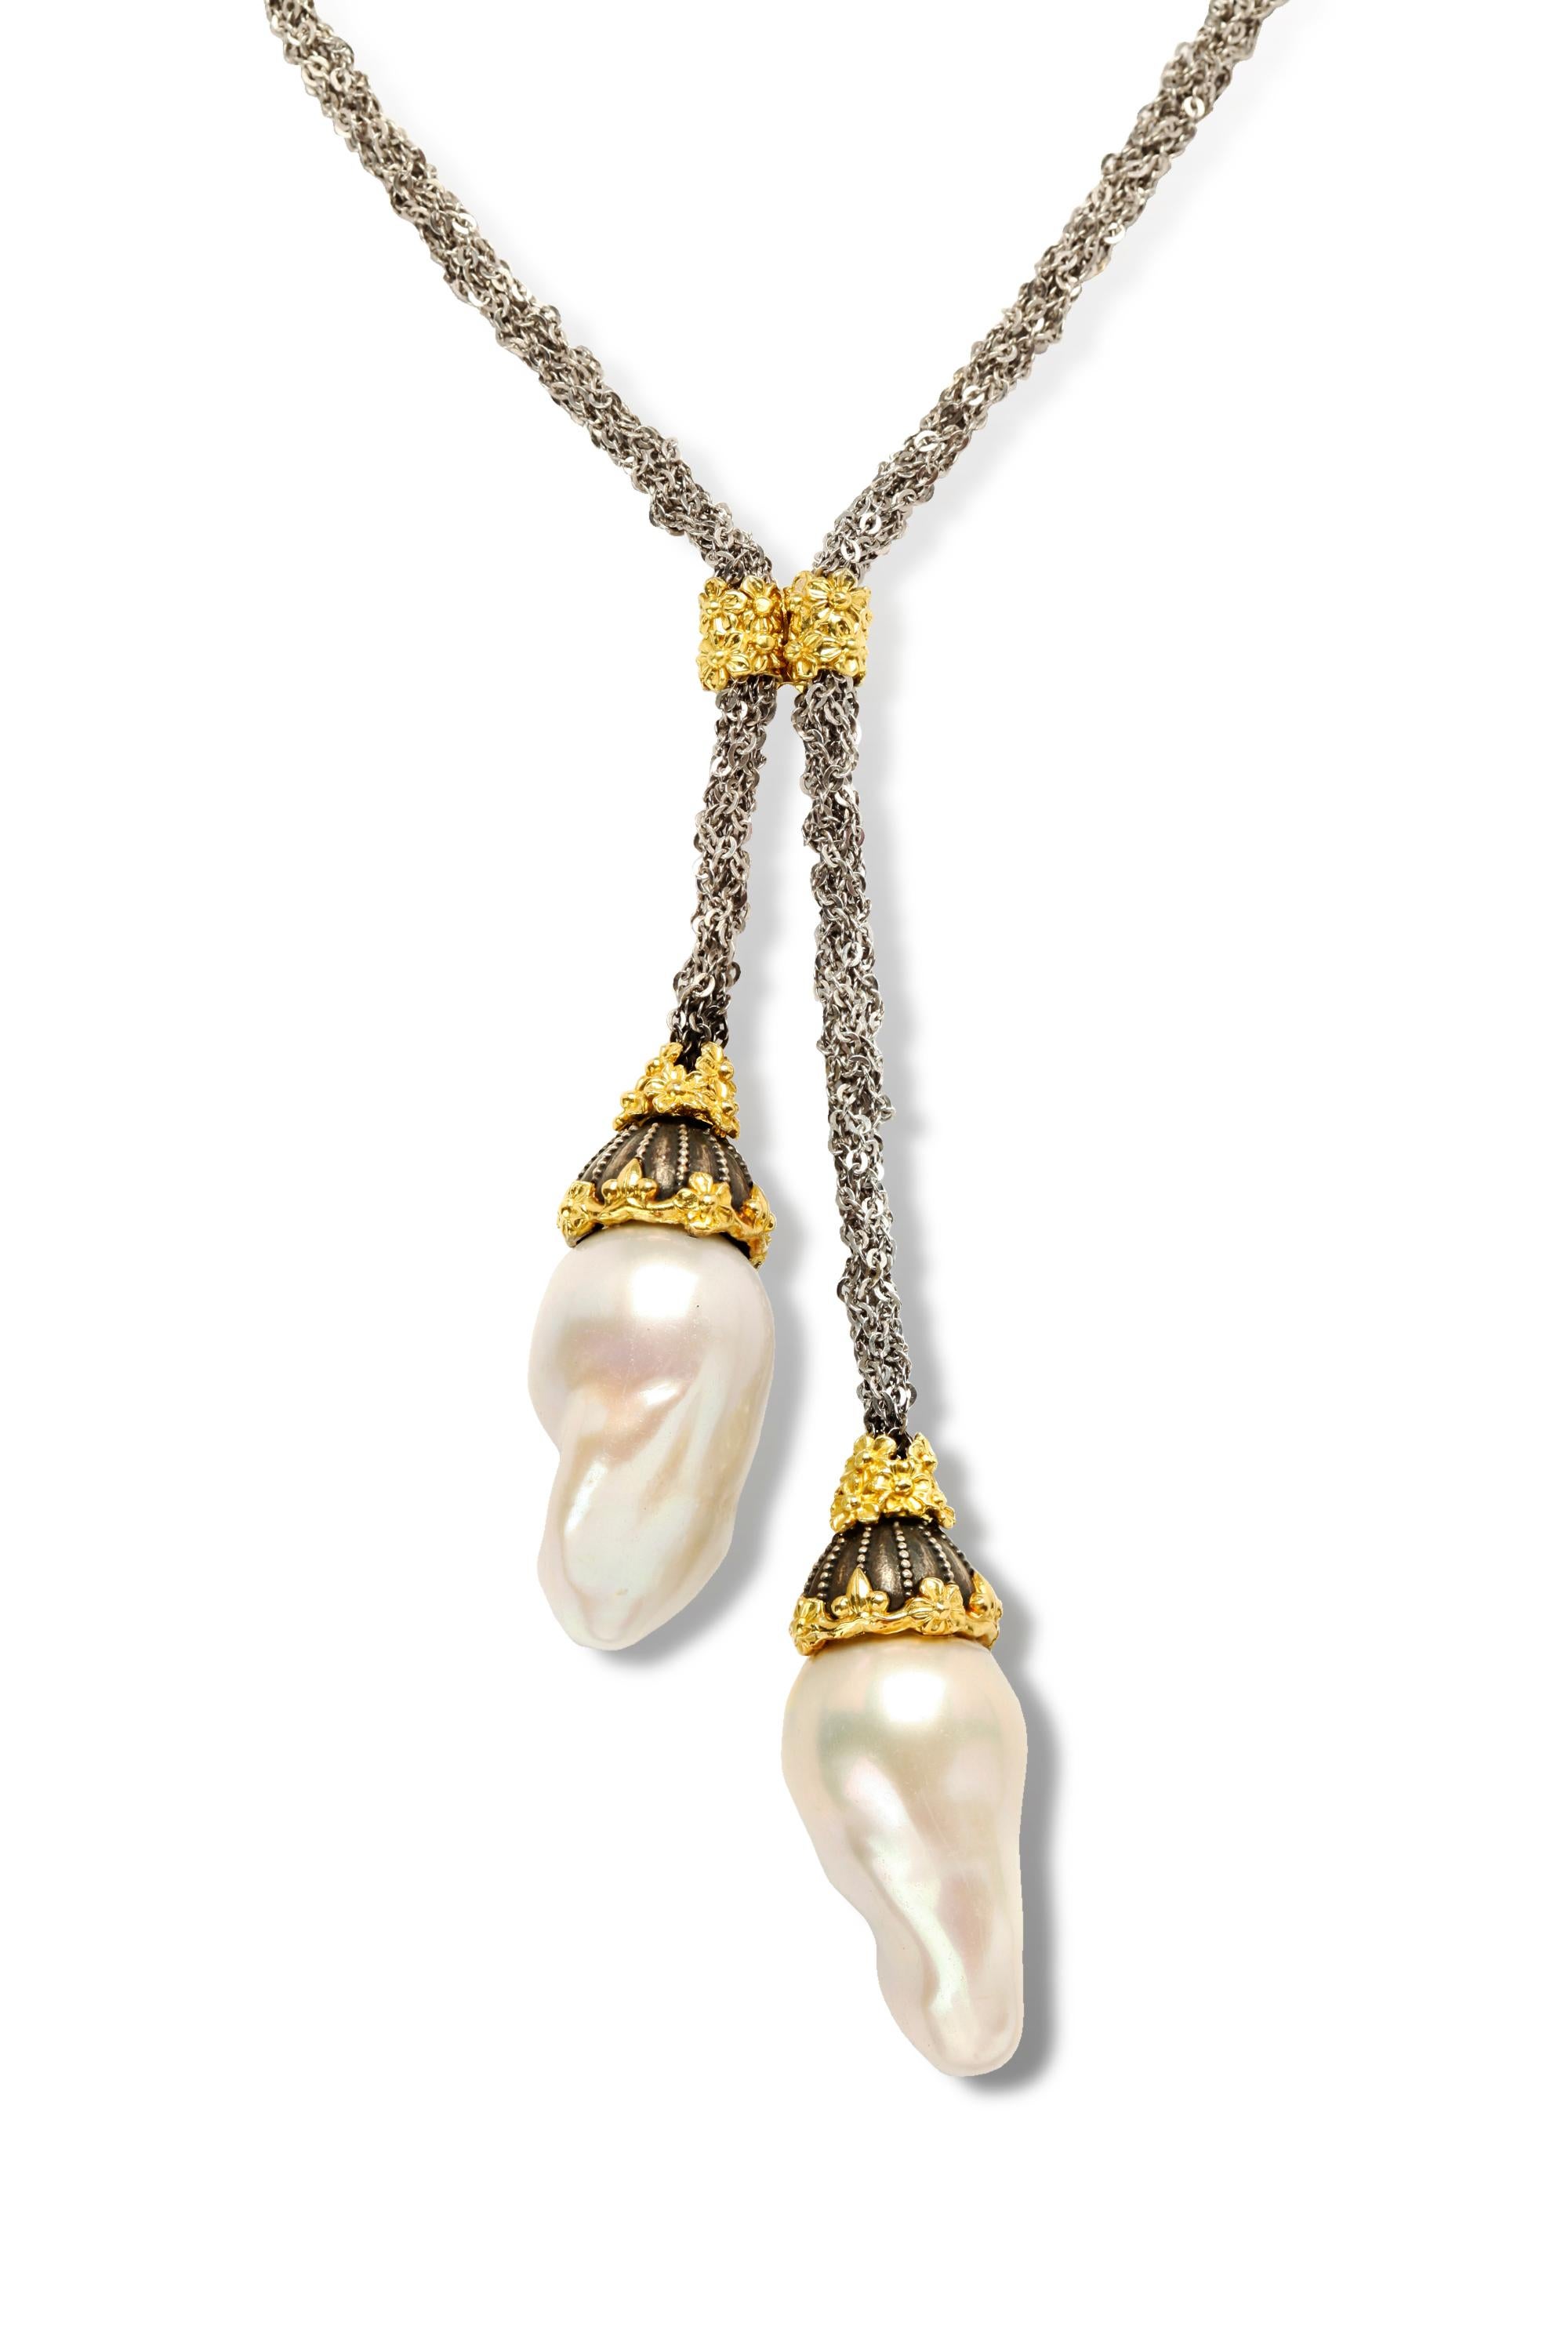 Stambolian Mesh Silver Chain and 18K Gold Baroque Pearl Drops Lariat Necklace 

This unique necklaces features a gorgeous mesh type chain that is connected in the center by a gold floral design

The design leads to two drops with fresh water baroque